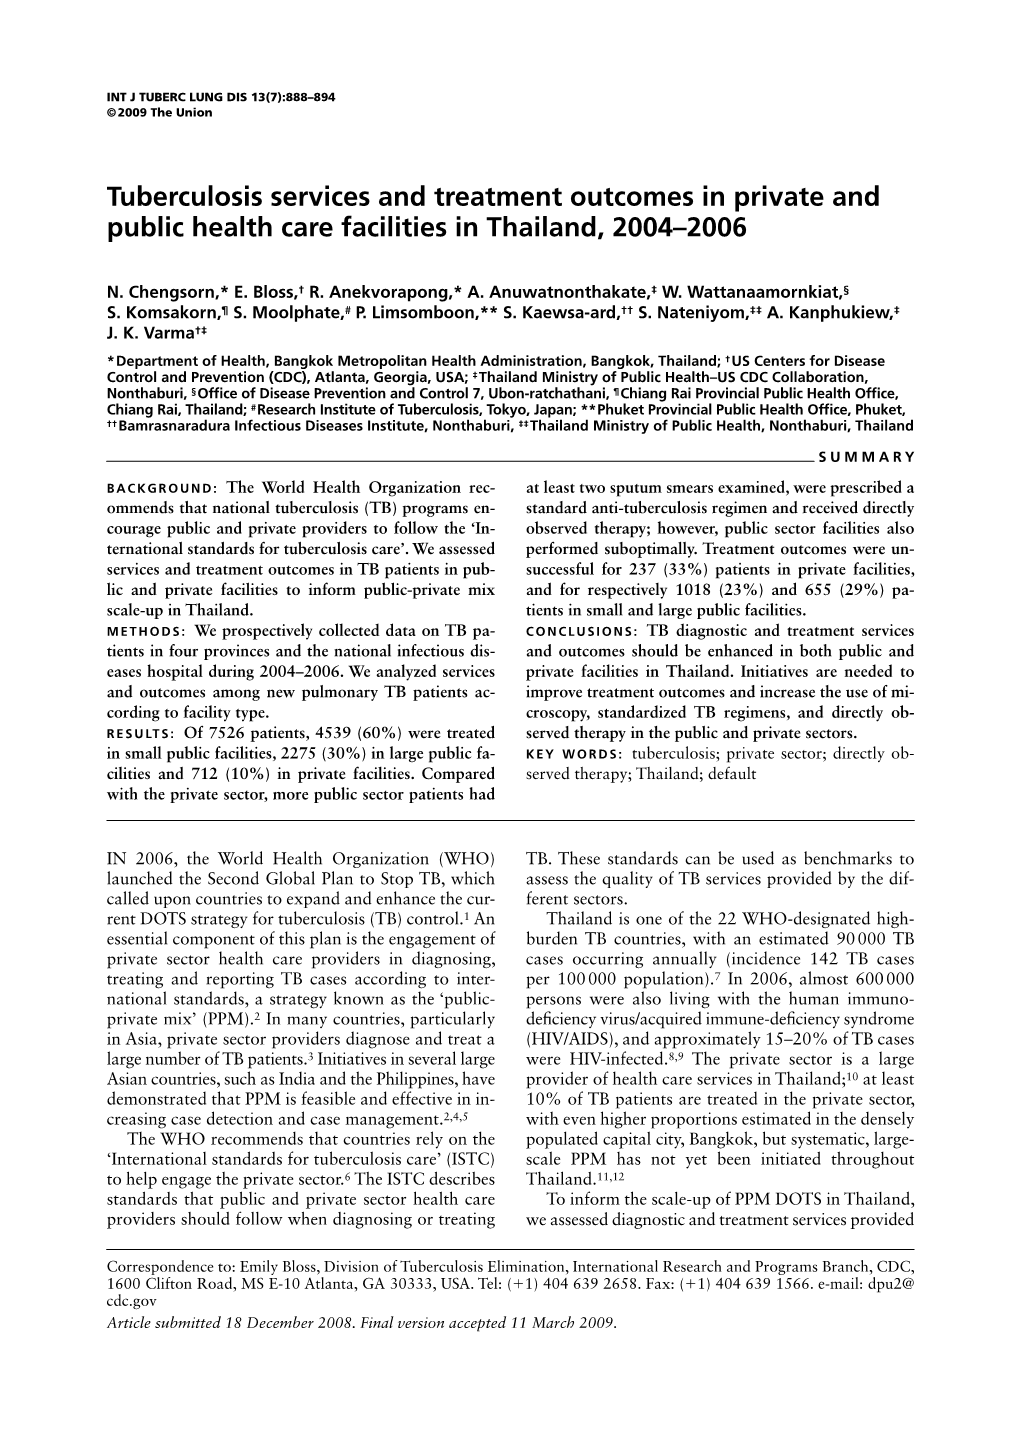 Tuberculosis Services and Treatment Outcomes in Private and Public Health Care Facilities in Thailand, 2004–2006